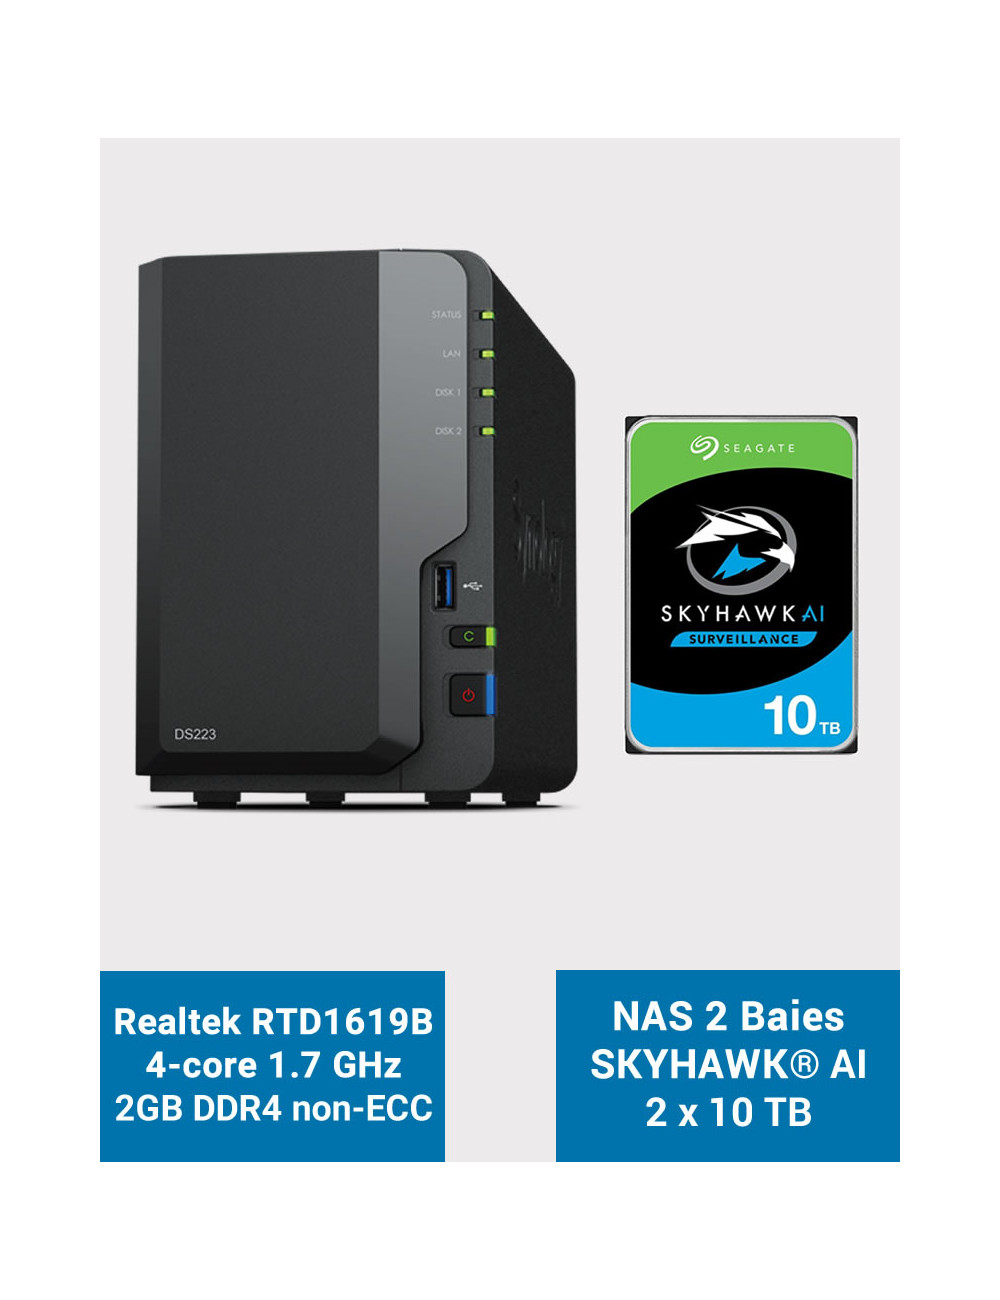 Synology DS223 Serveur NAS SkyHawk 20To (2x10To)